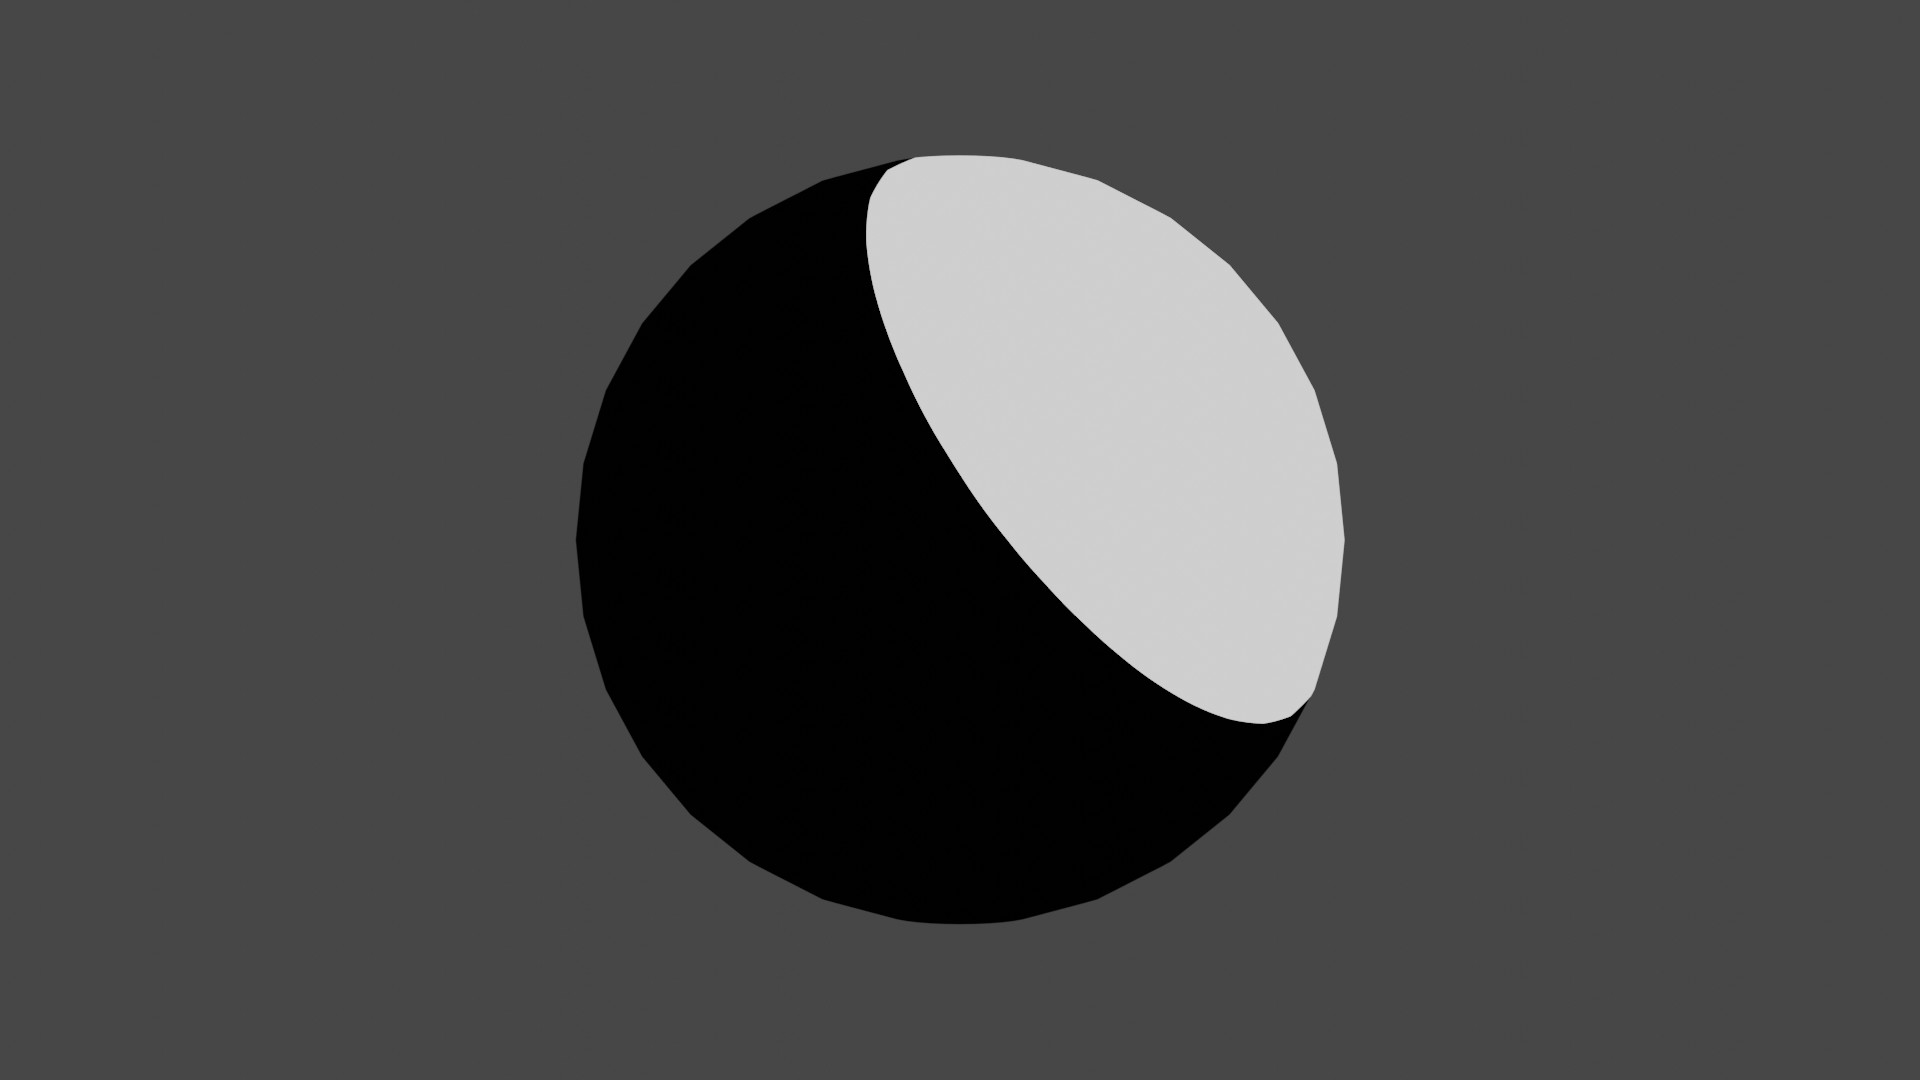 A two-dimensional circle colored white and black with no gradient blending the colors together.